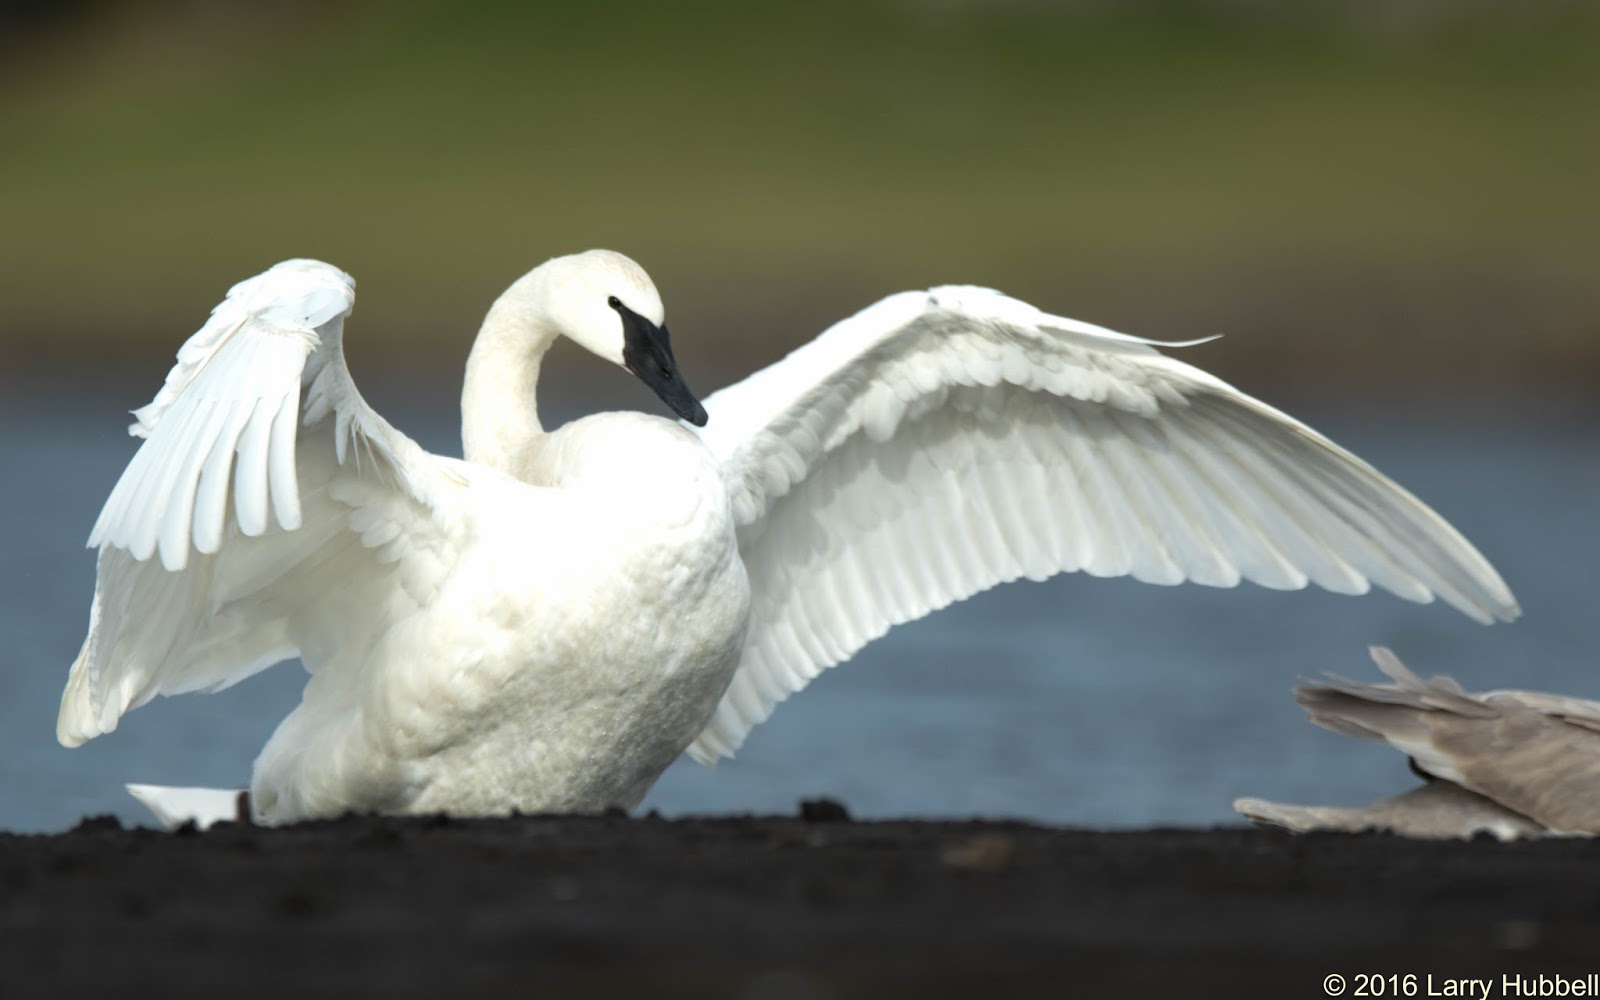 Union Bay Watch : The World's Largest Swans